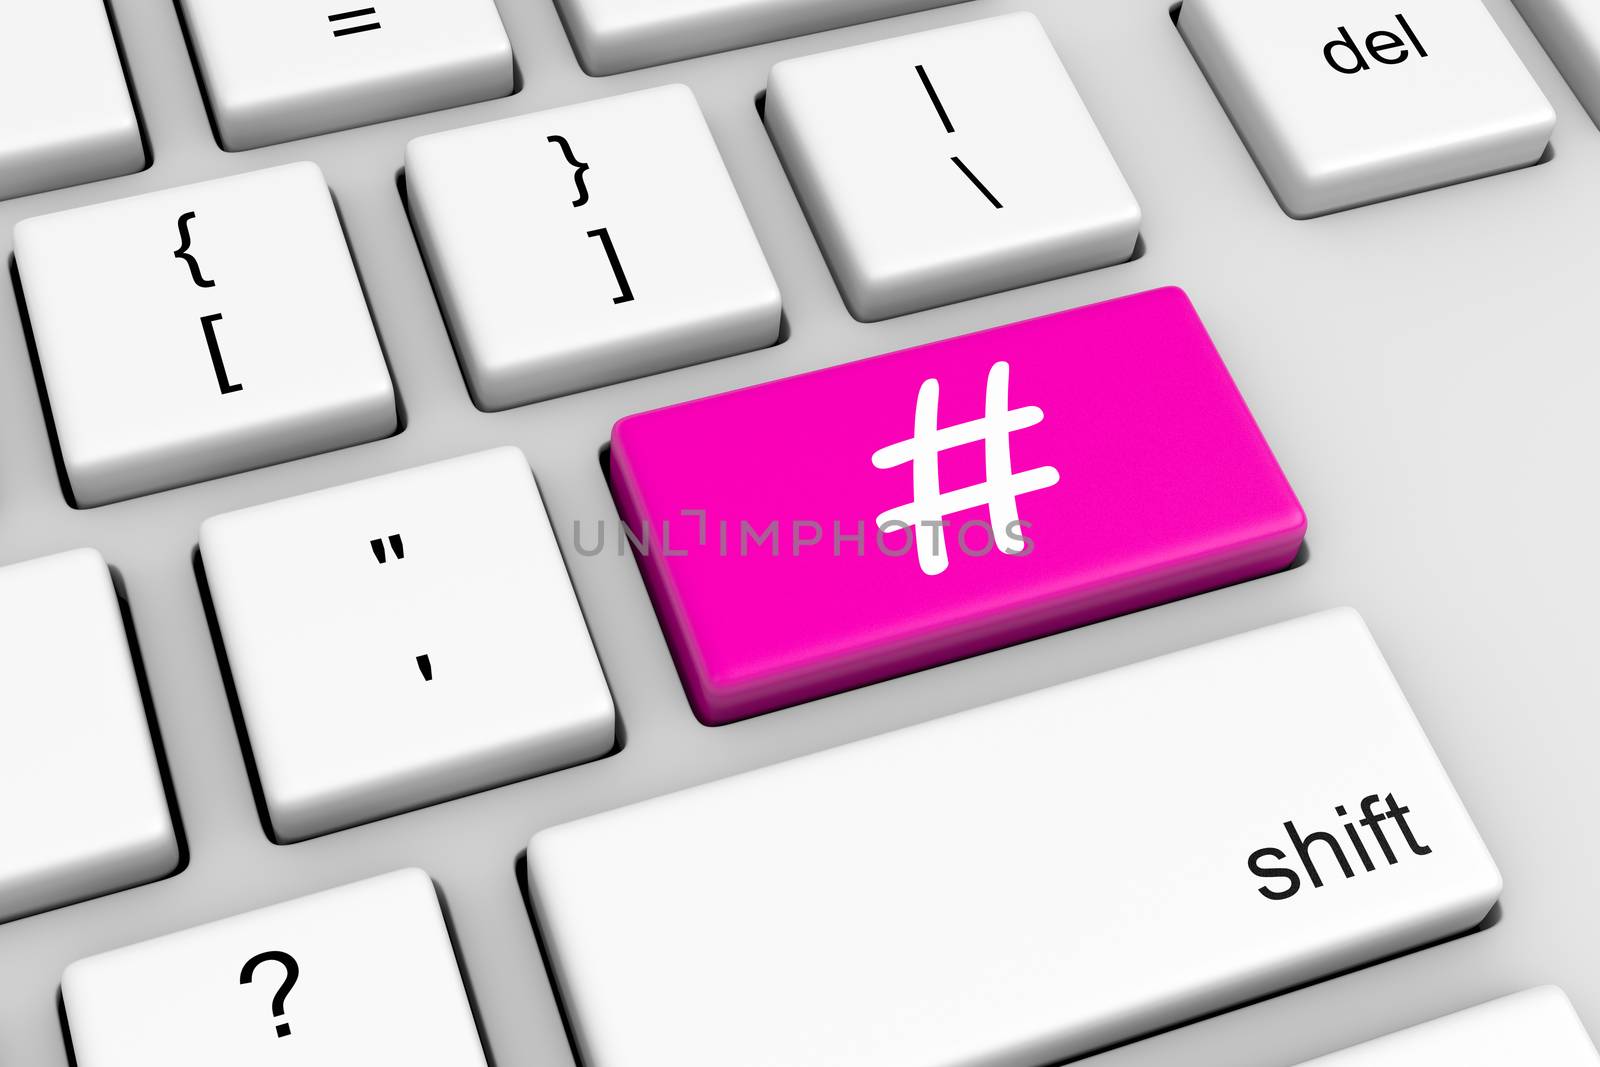 Computer Keyboard with Hashtag Symbol Button Illustration